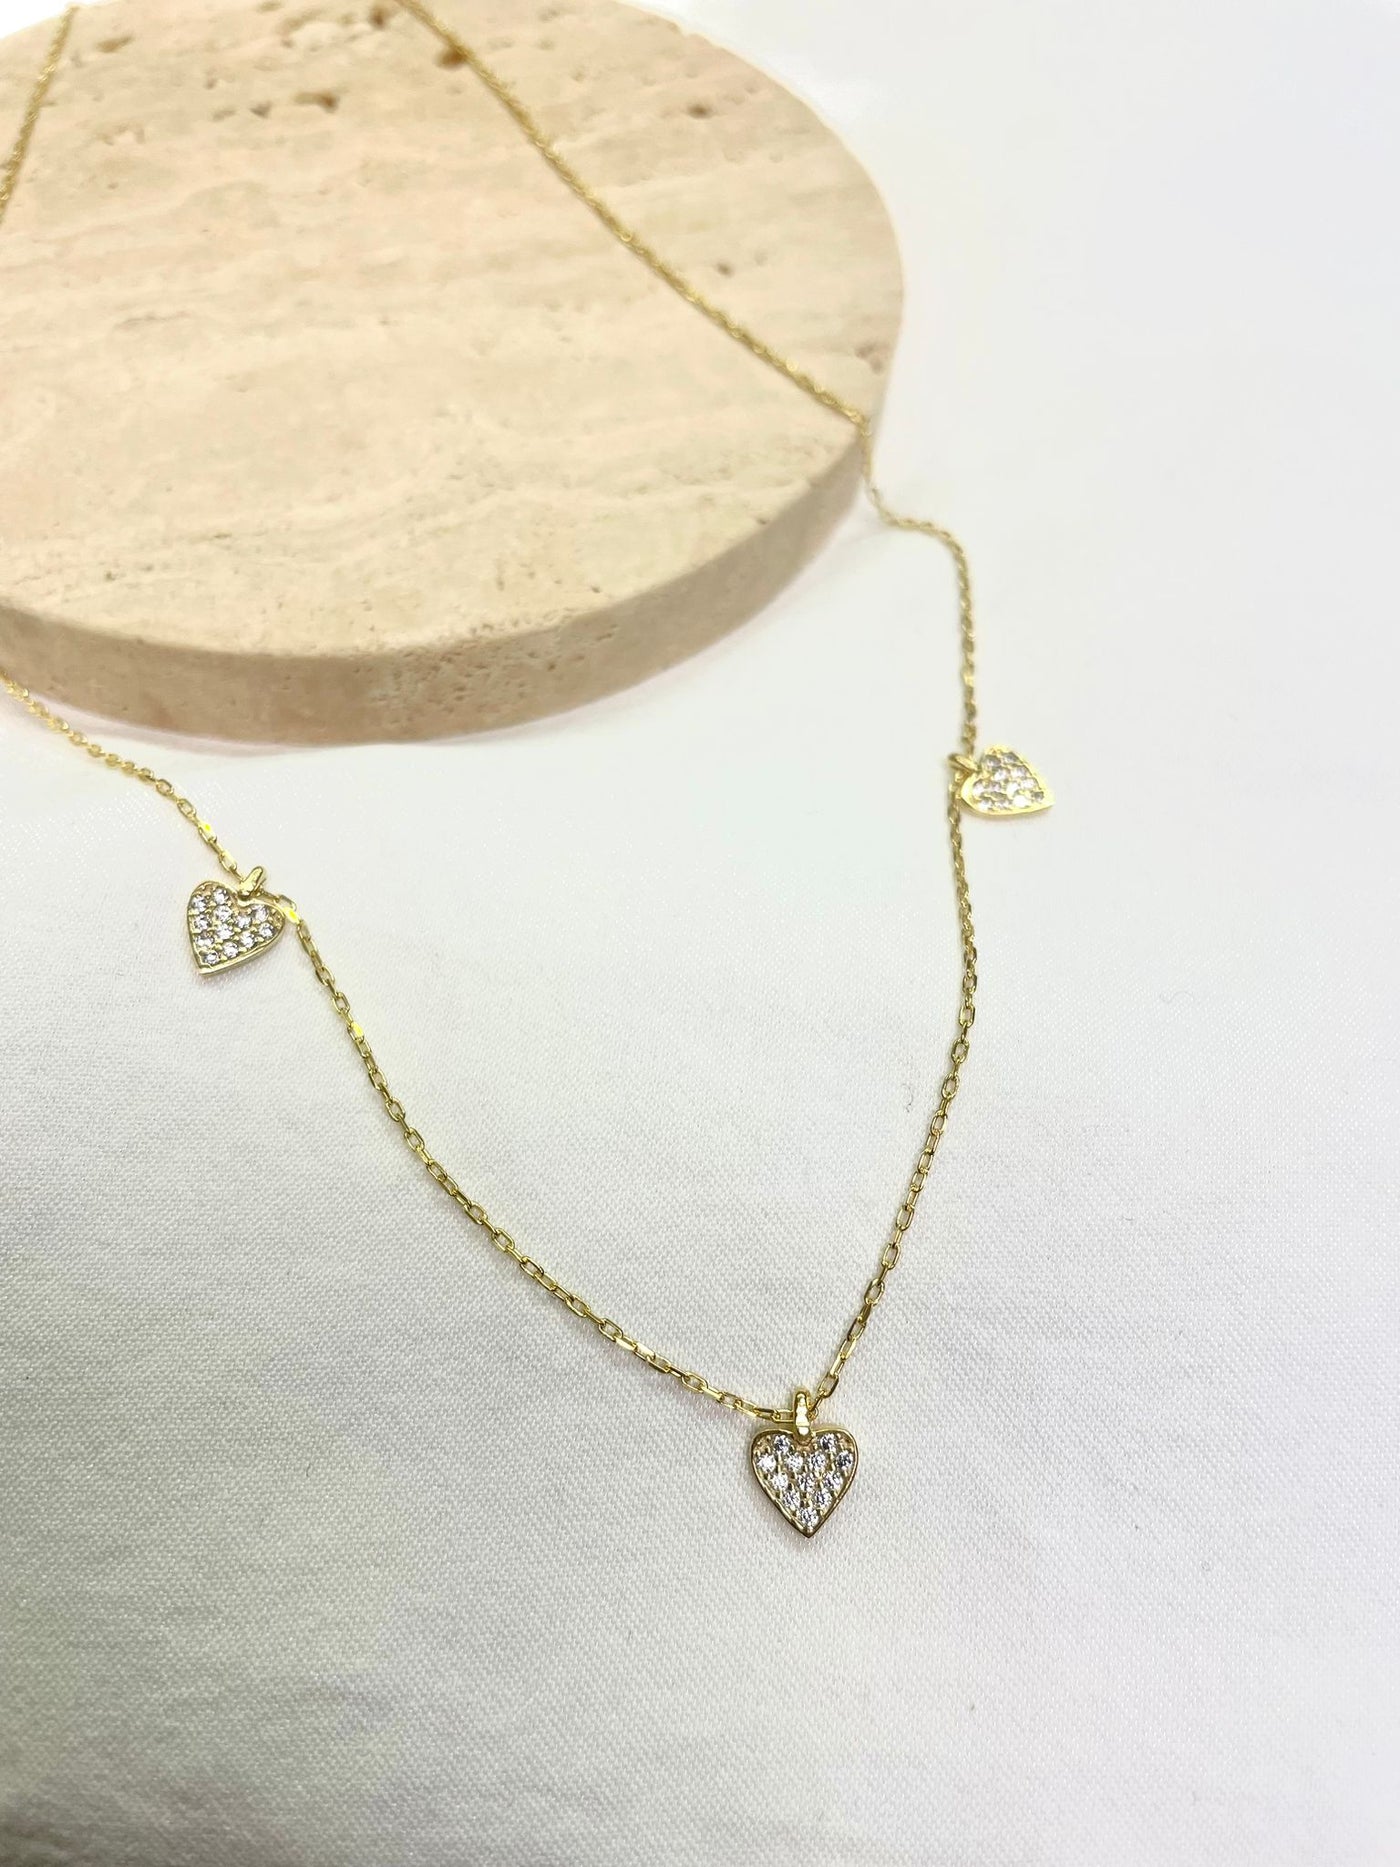 HEART Necklace